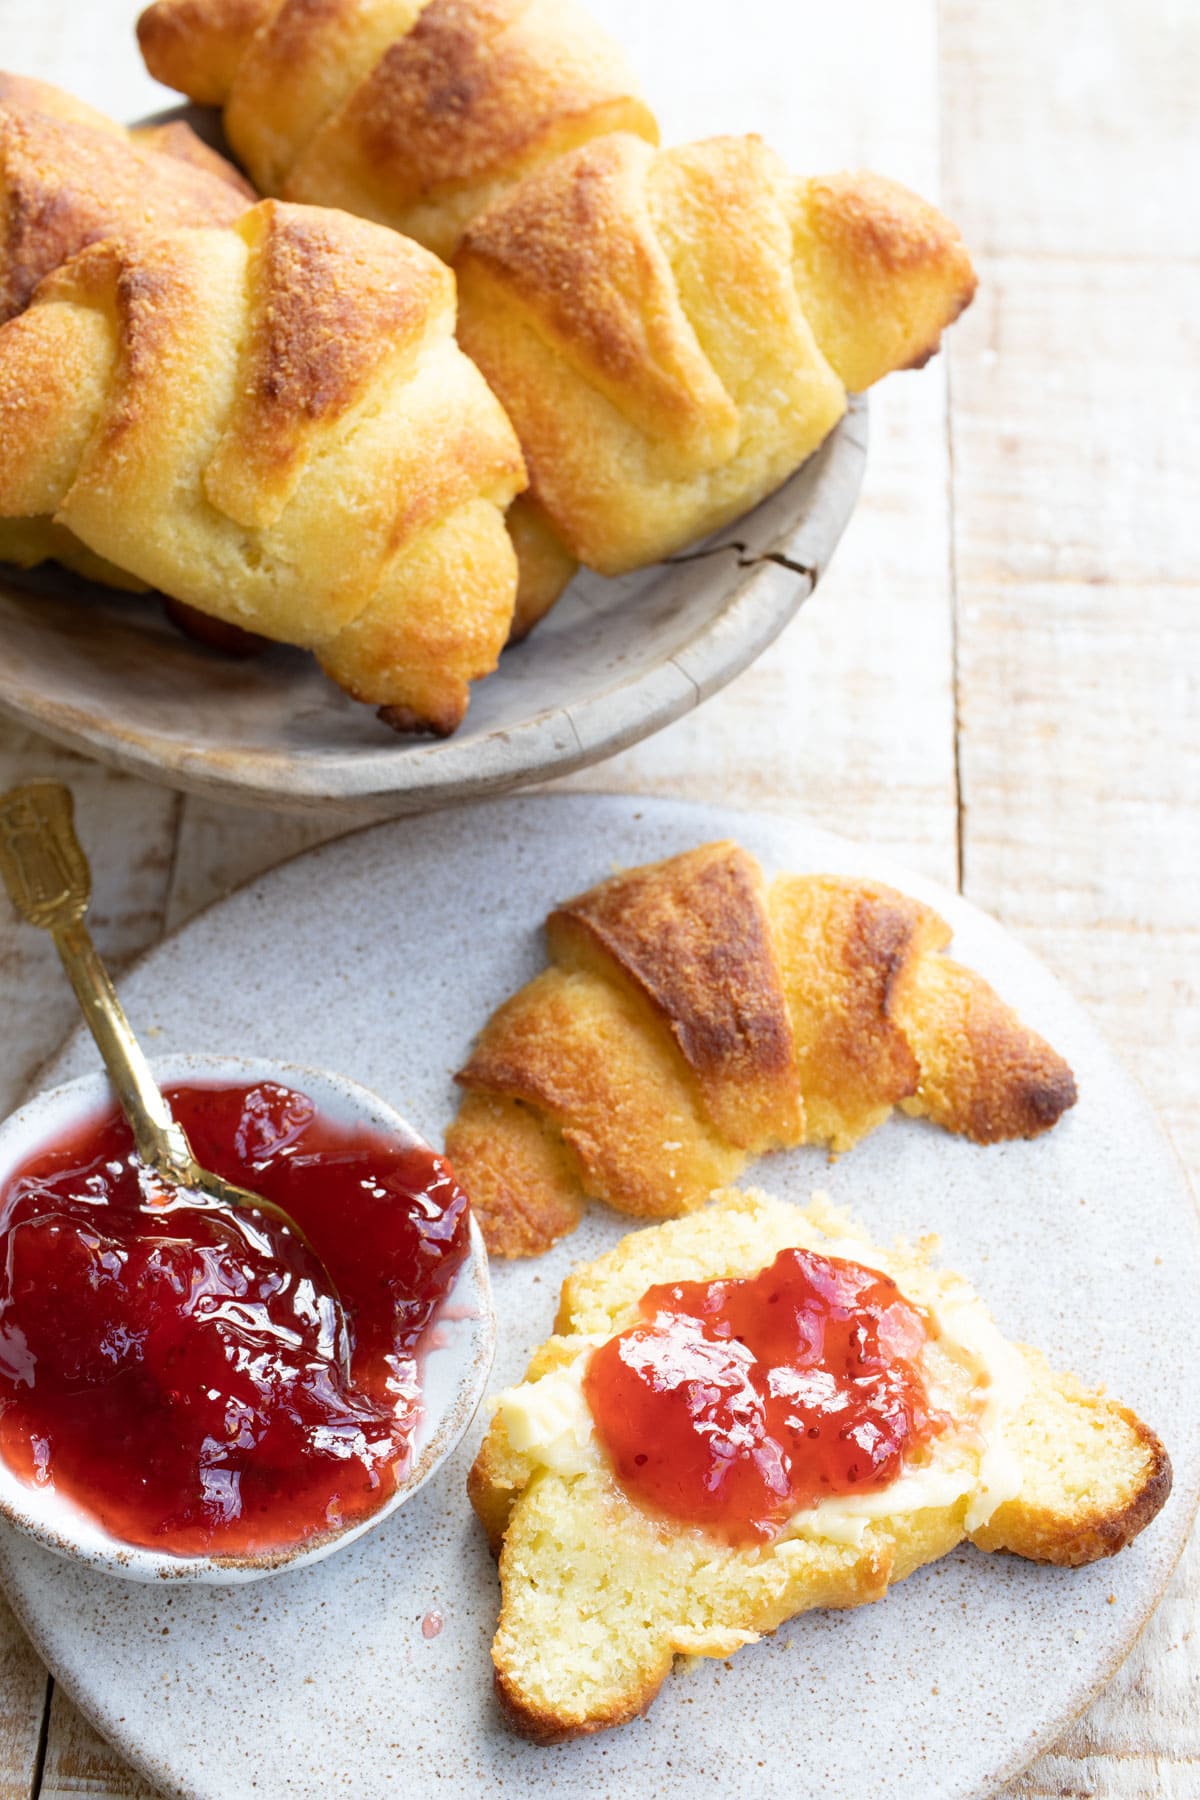 A croissant sliced open and topped with butter and strawberry jam, plus a bowl with croissants.